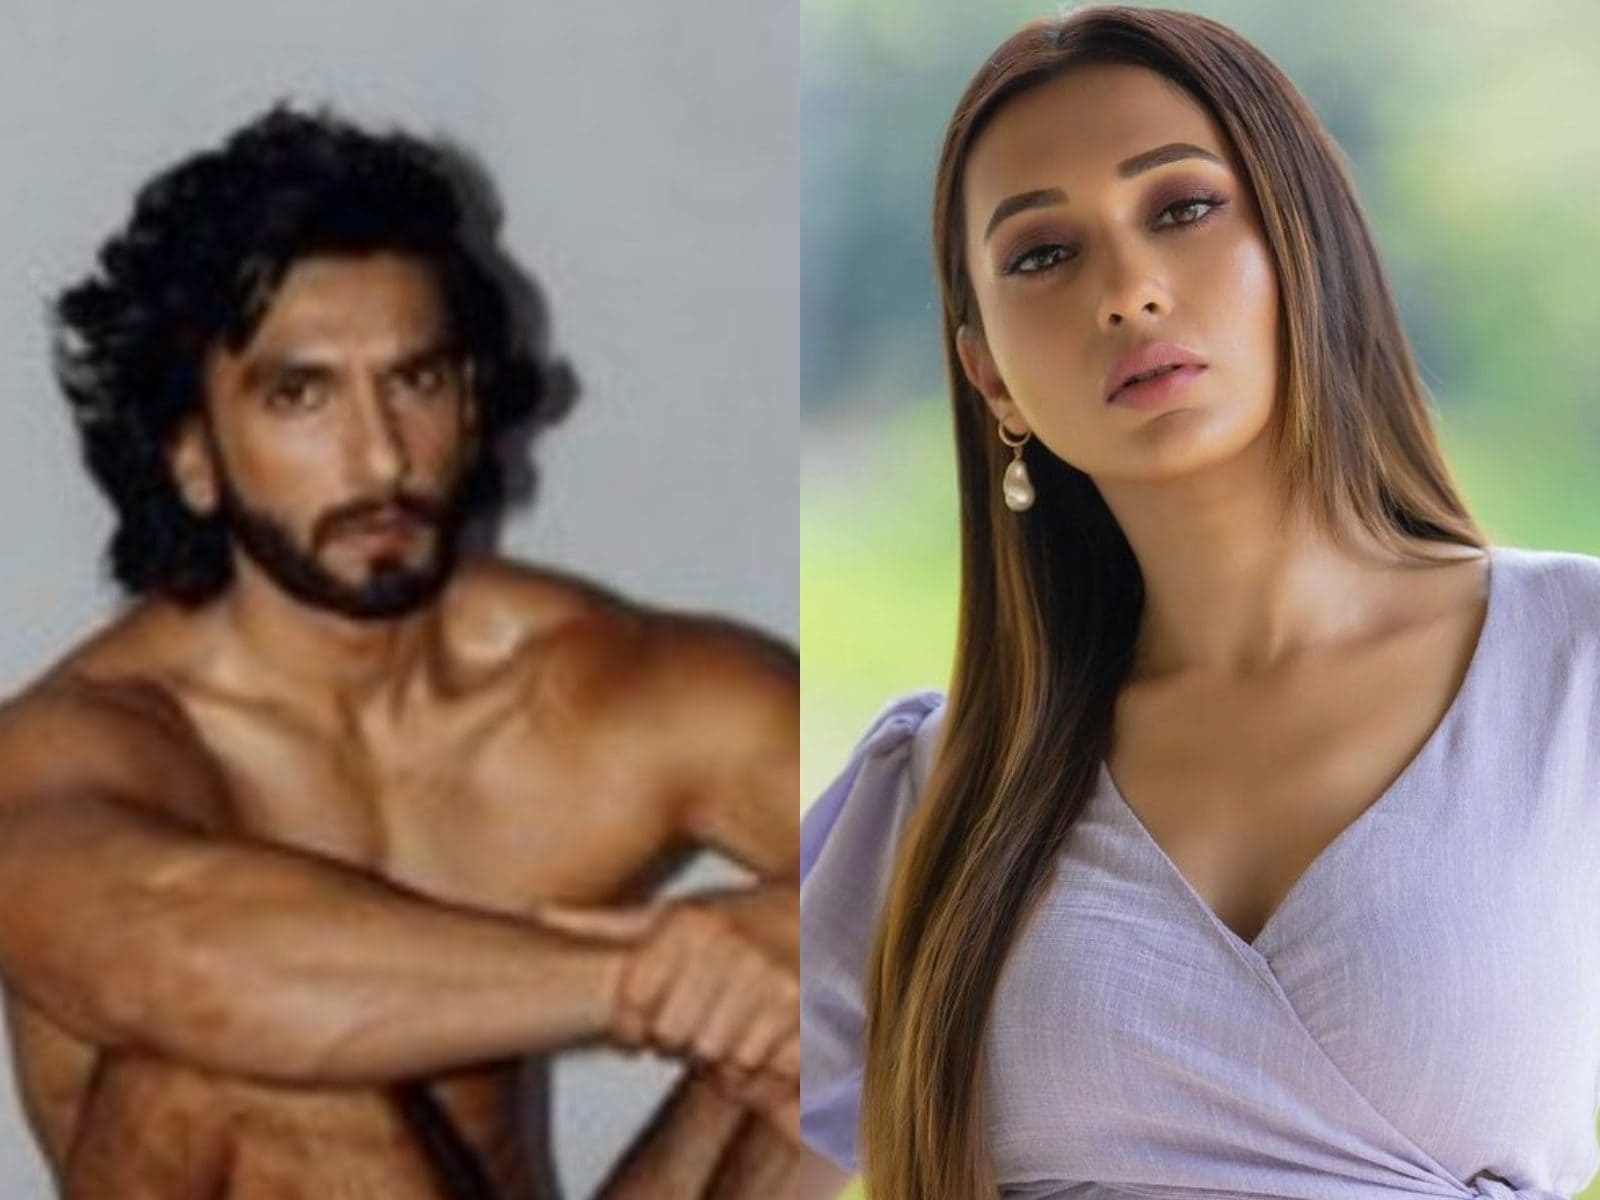 Naked Mimi Chakraborty - Mimi Chakraborty on Ranveer Singh's Nude Photoshoot: 'Wonder If  Appreciation Would Have Been The Same...' - News18